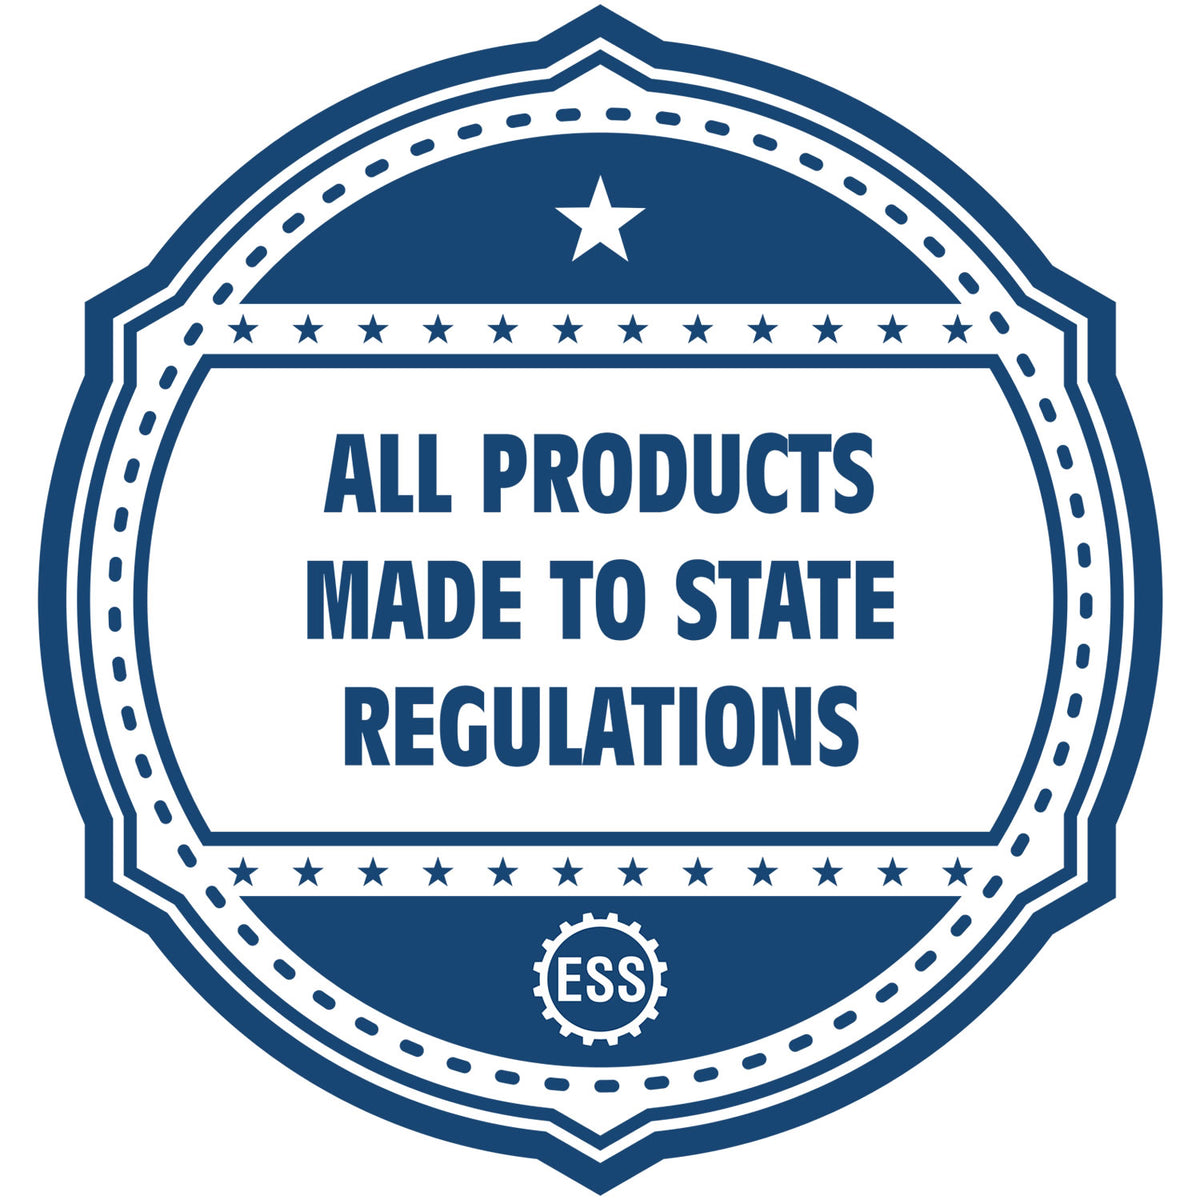 An icon or badge element for the Extended Long Reach Hawaii Architect Seal Embosser showing that this product is made in compliance with state regulations.